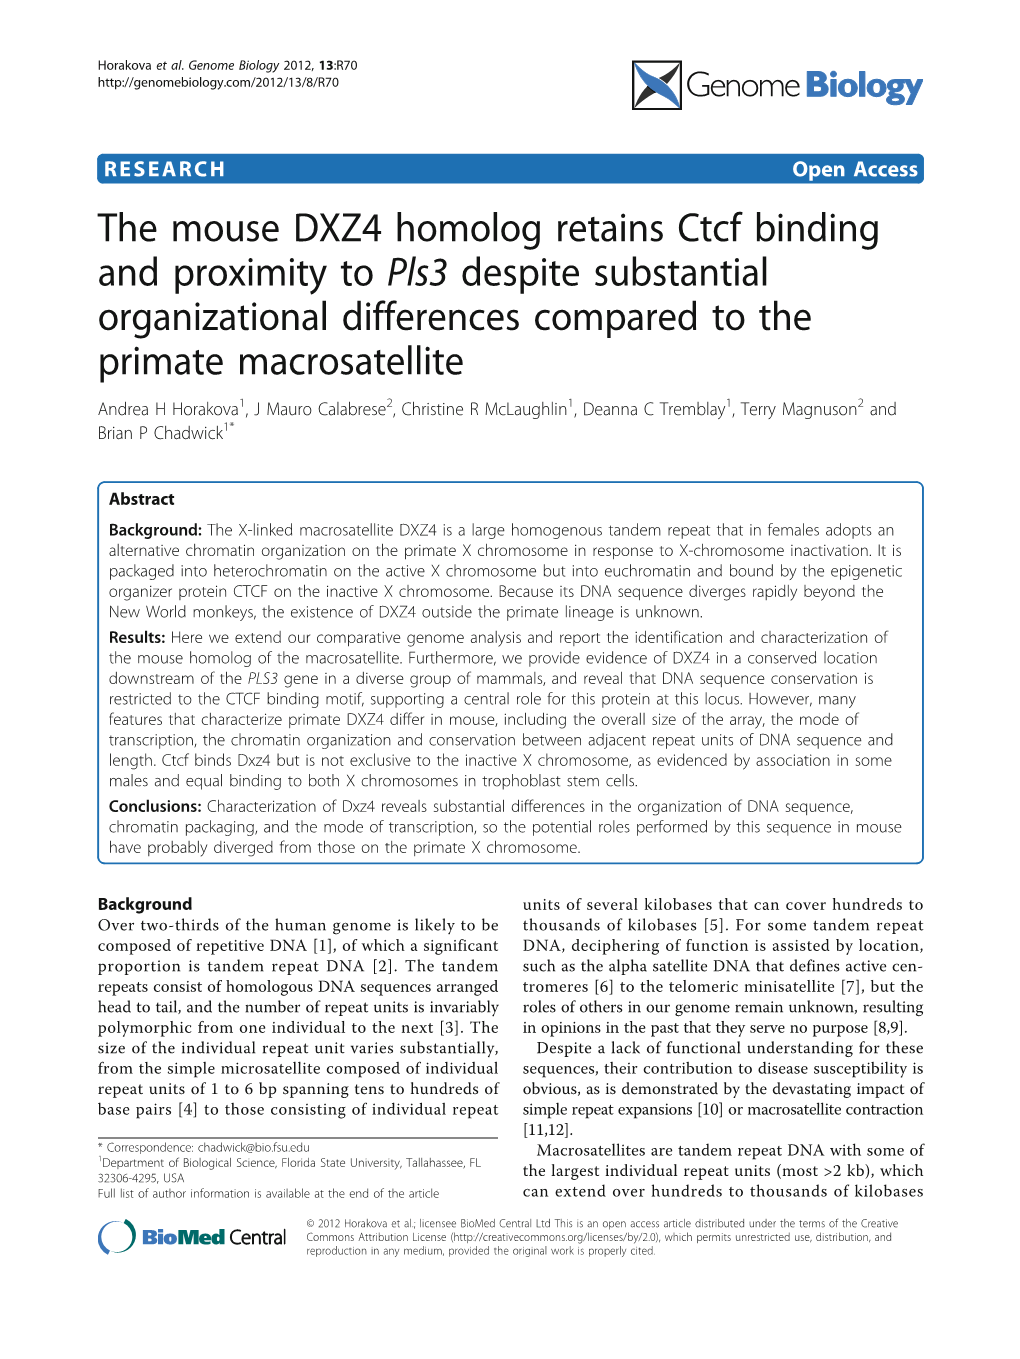 The Mouse DXZ4 Homolog Retains Ctcf Binding and Proximity to Pls3 Despite Substantial Organizational Differences Compared To